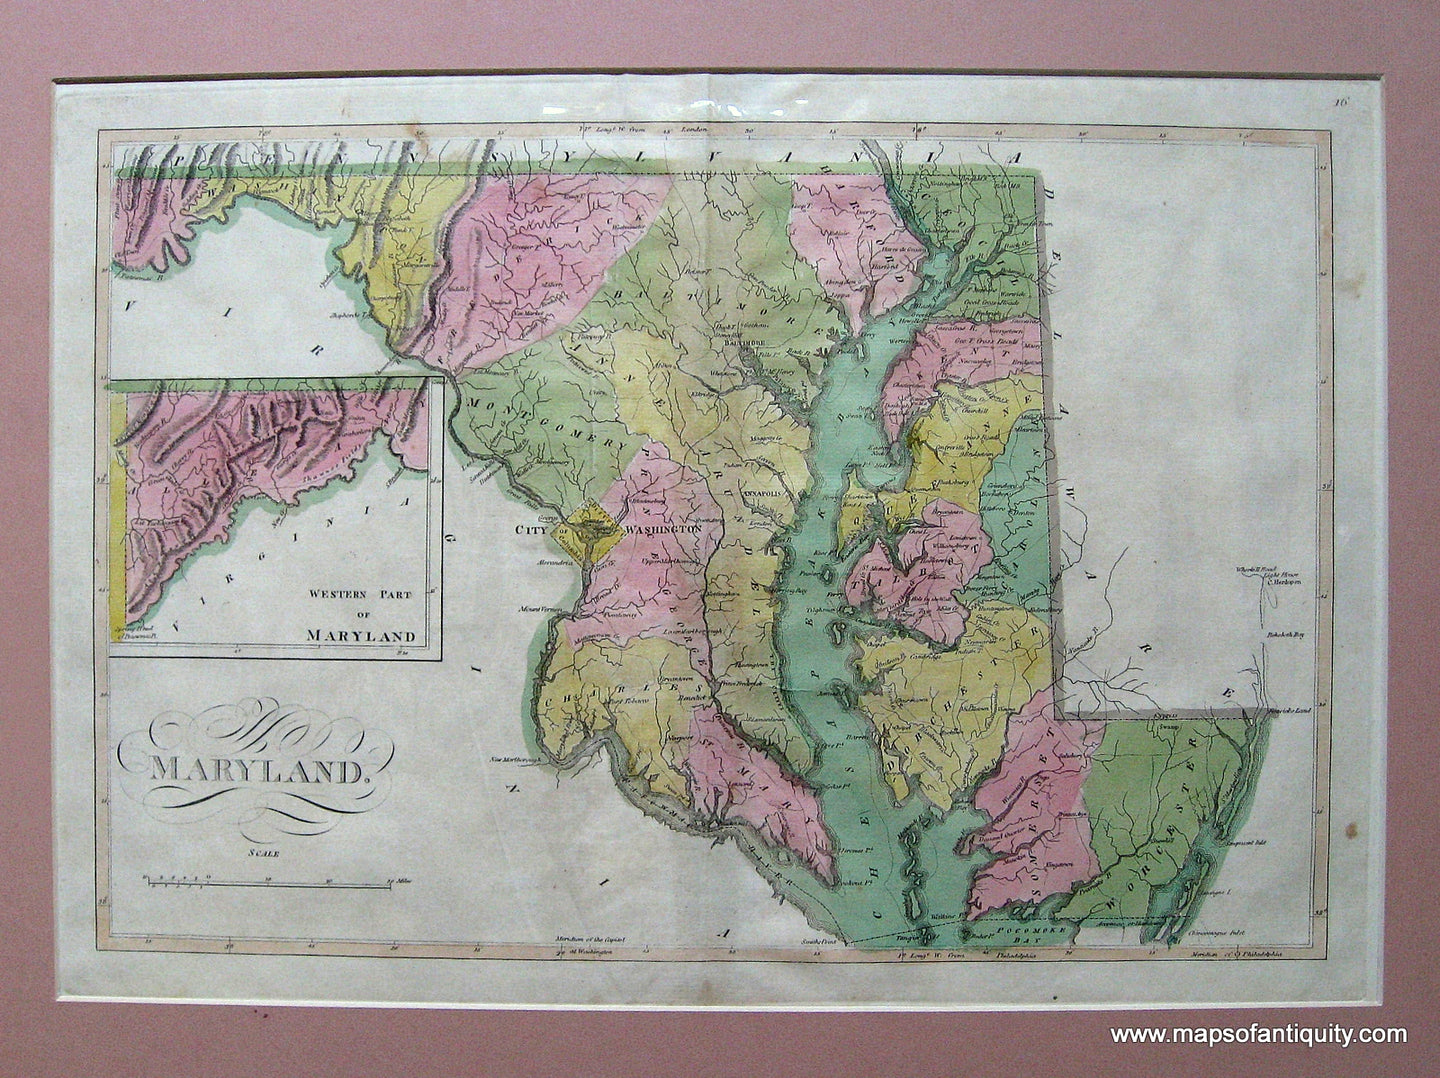 Antique-Hand-Colored-Map-Maryland.-United-States-Mid-Atlantic-1814-Mathew-Carey-Maps-Of-Antiquity